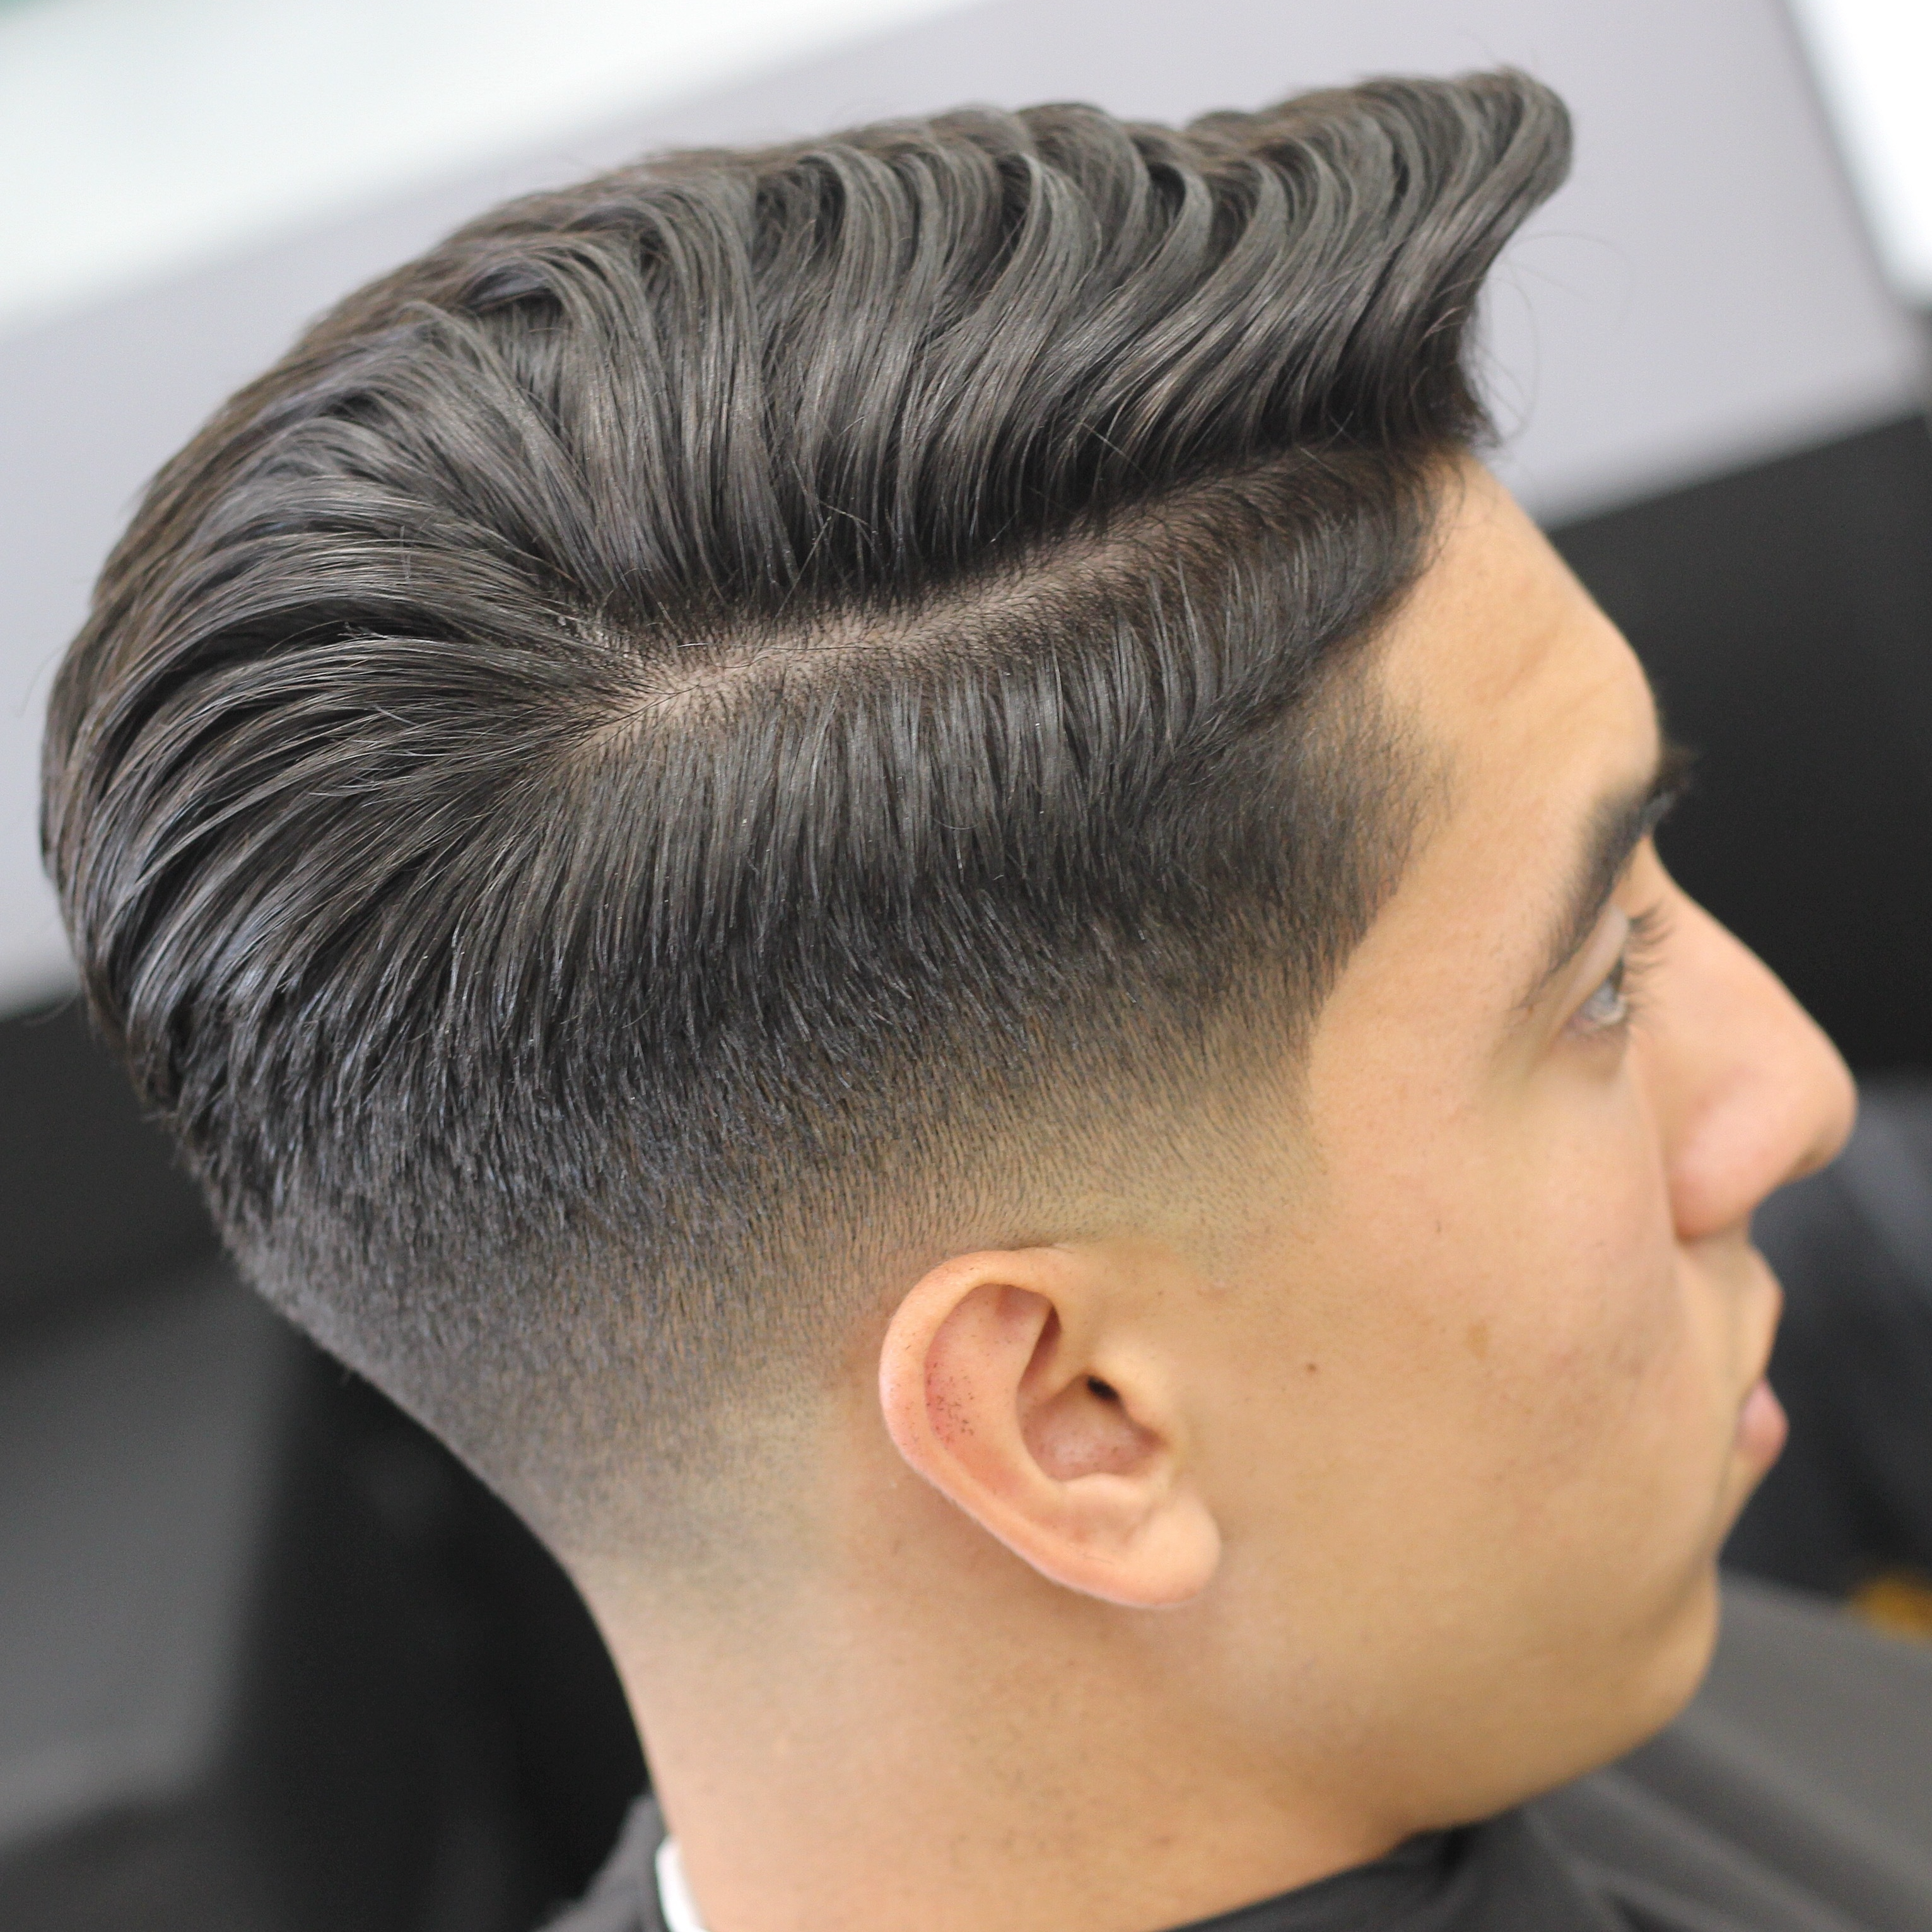 Male classic hair style with mid-fade and side part with wavy top designed by Andis barbering tools.